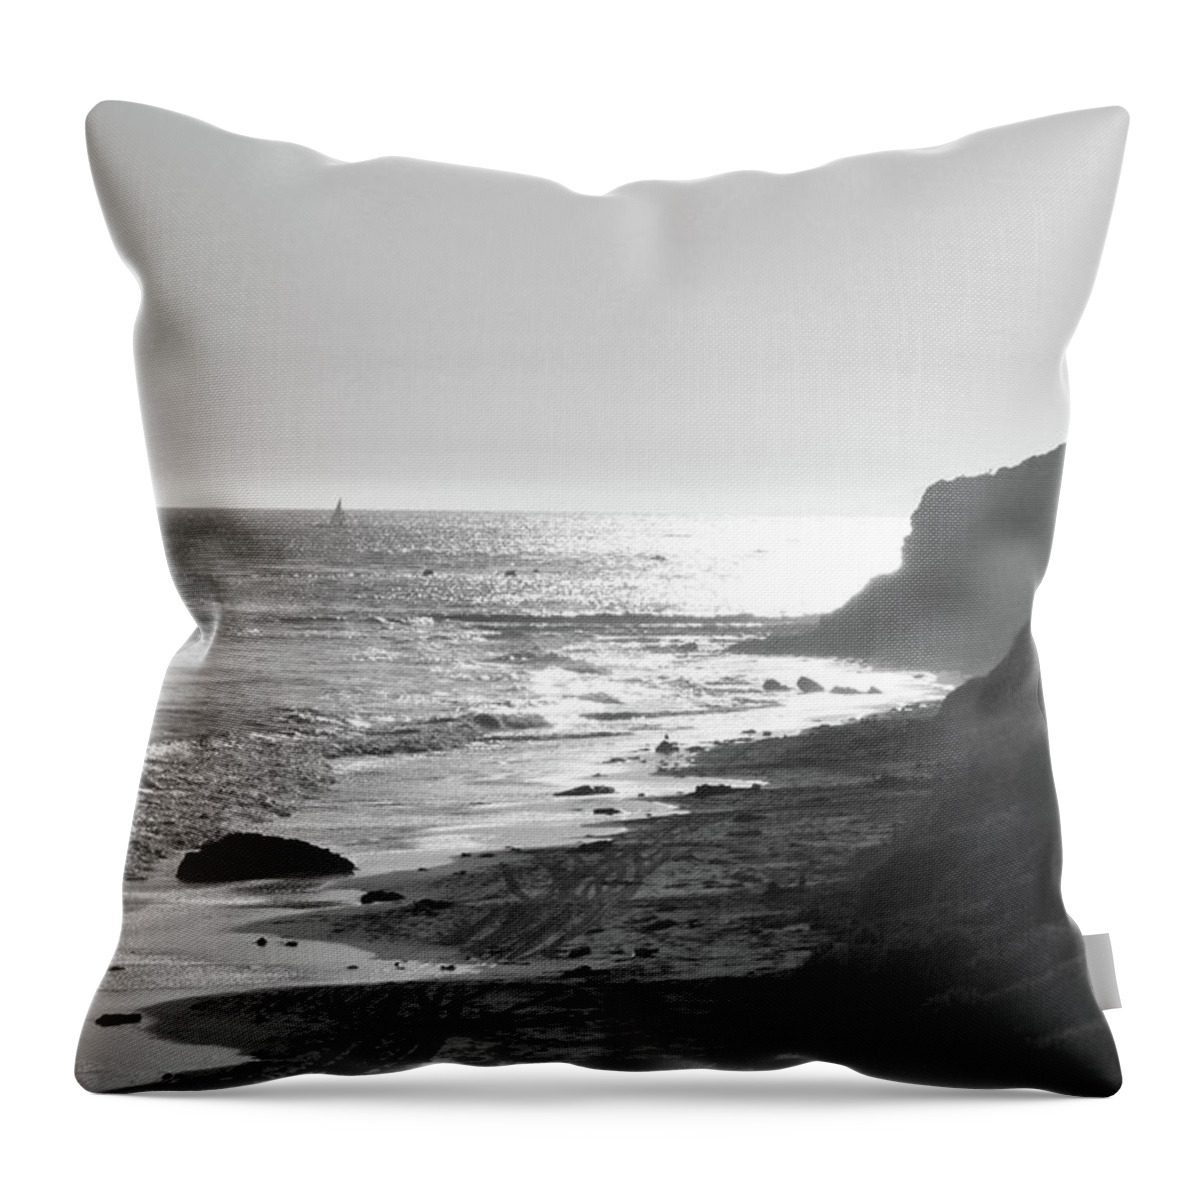 Ocean Throw Pillow featuring the photograph Crystal Cove I by Suzette Kallen